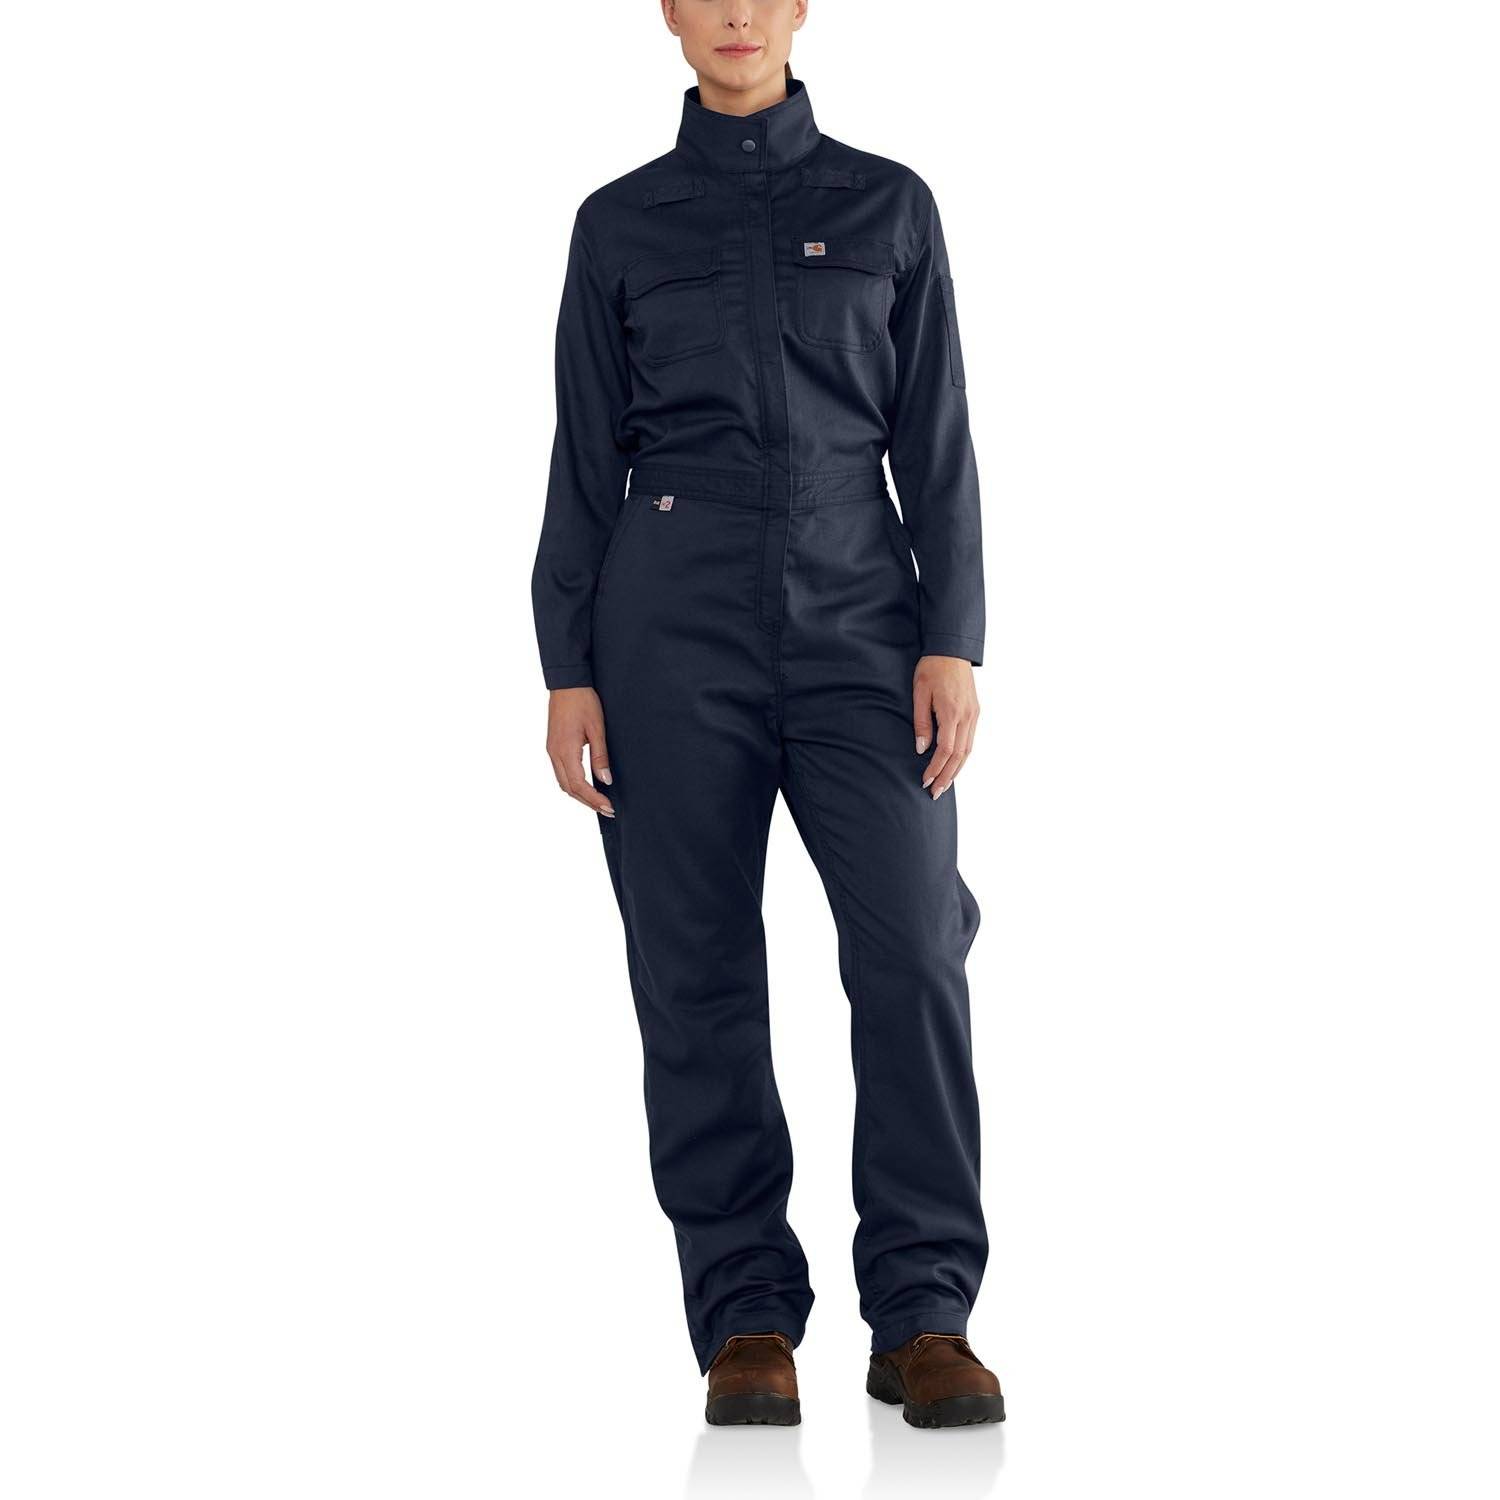 Carhartt Women's Flame-Resistant Rugged Flex Coveralls